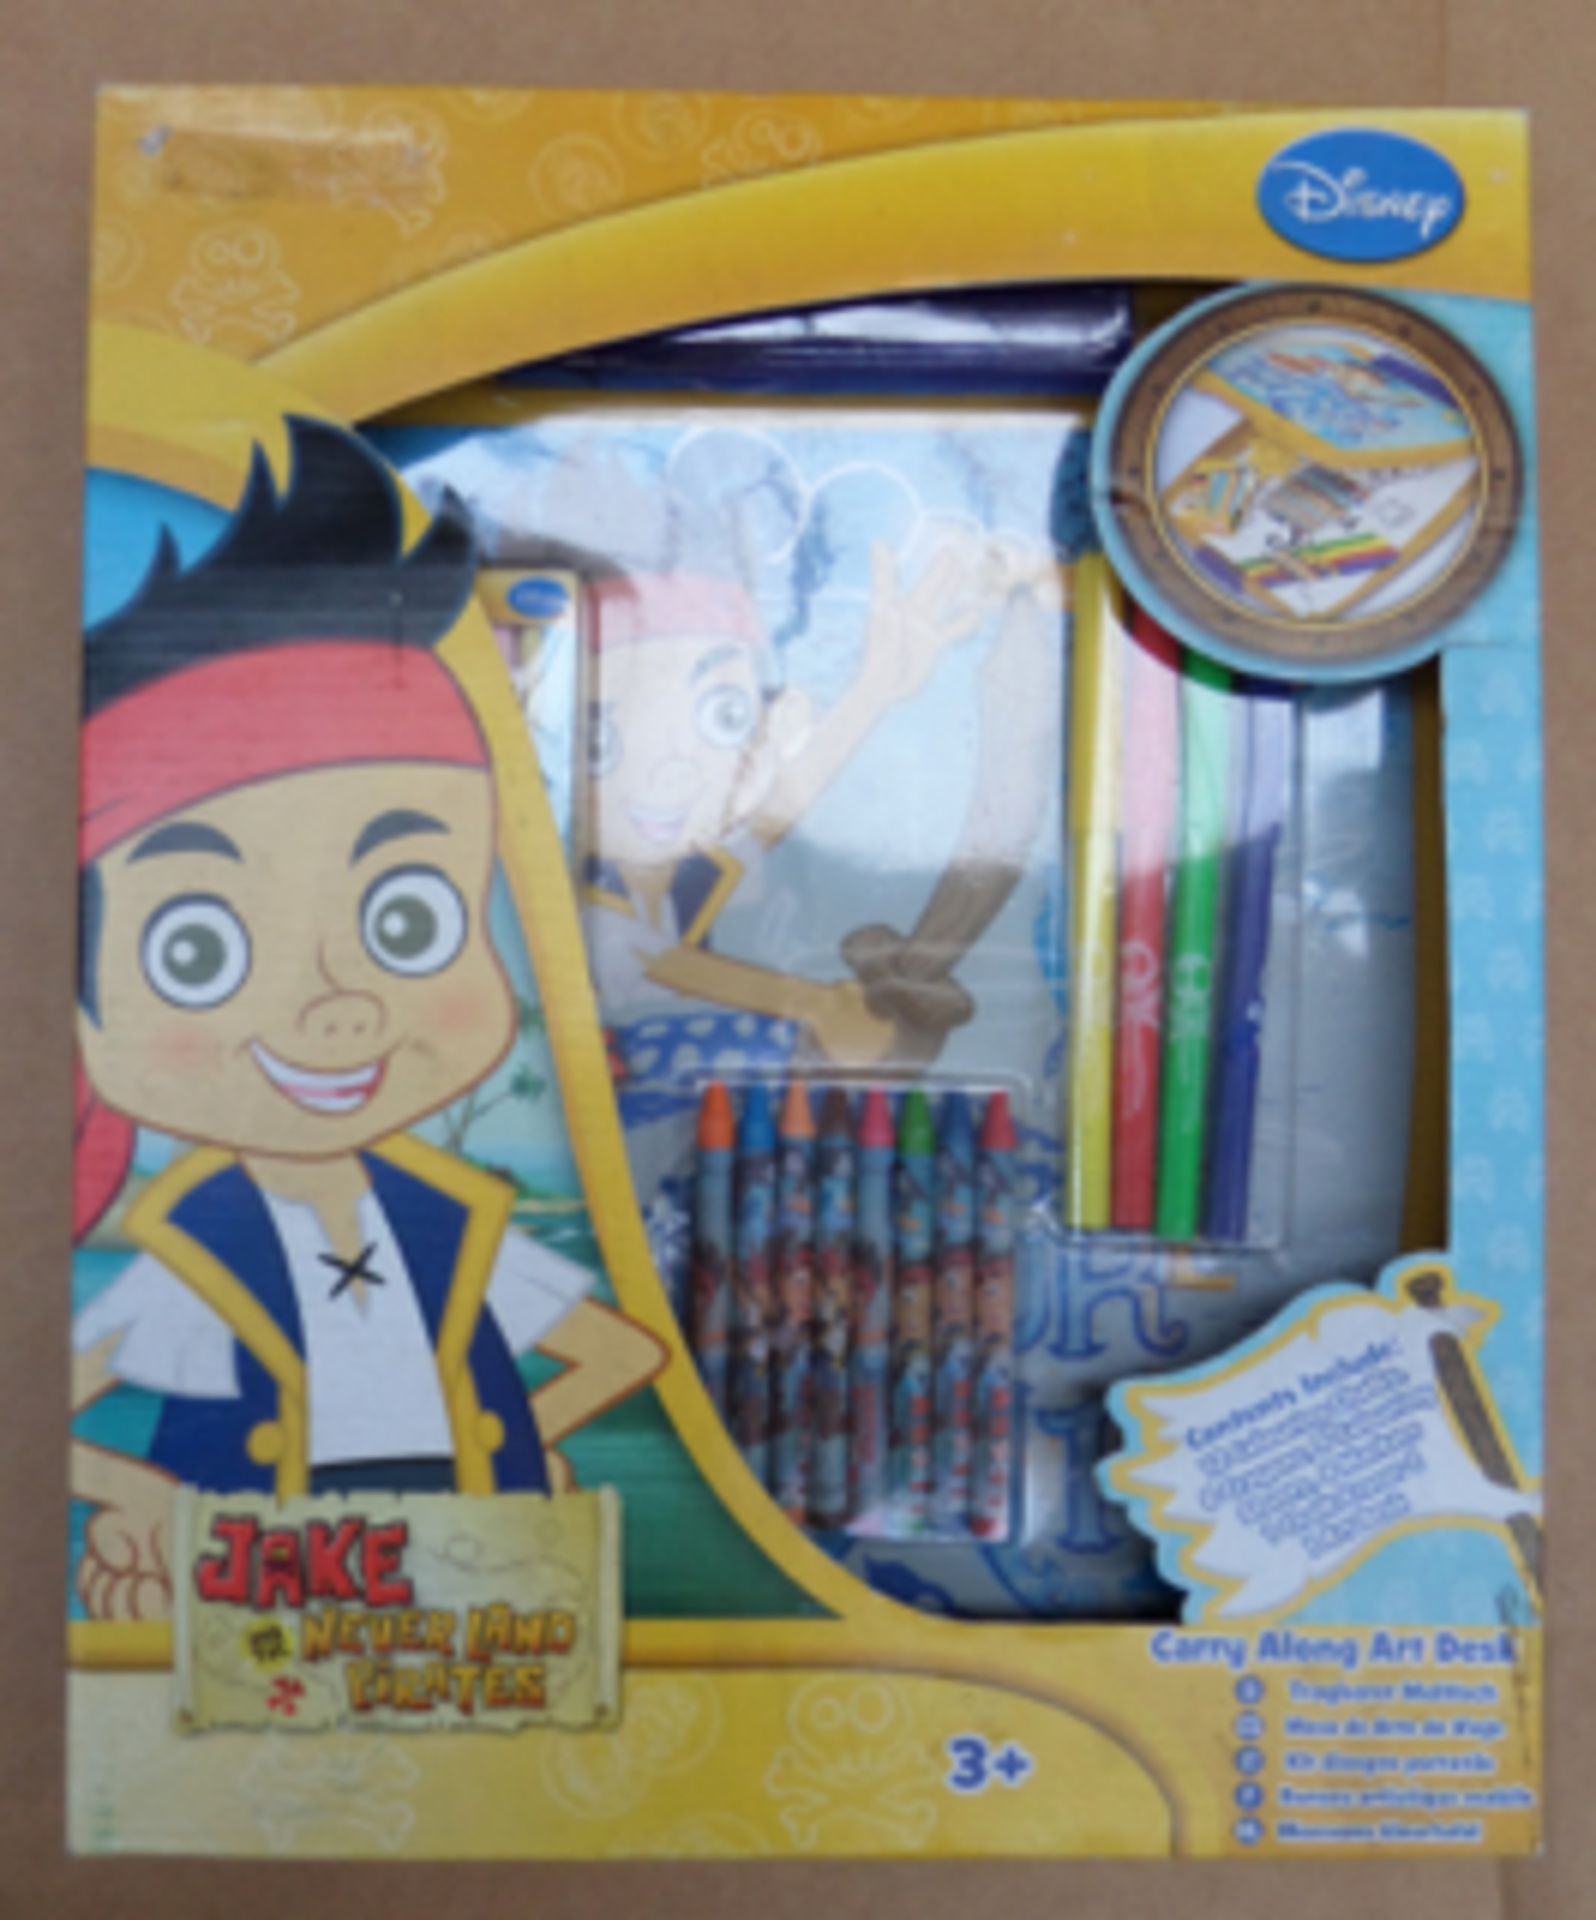 18 x Disney Jake and the Never Land Pirates Carry Along Art Desks. Brand new and Boxed. RRP £360!